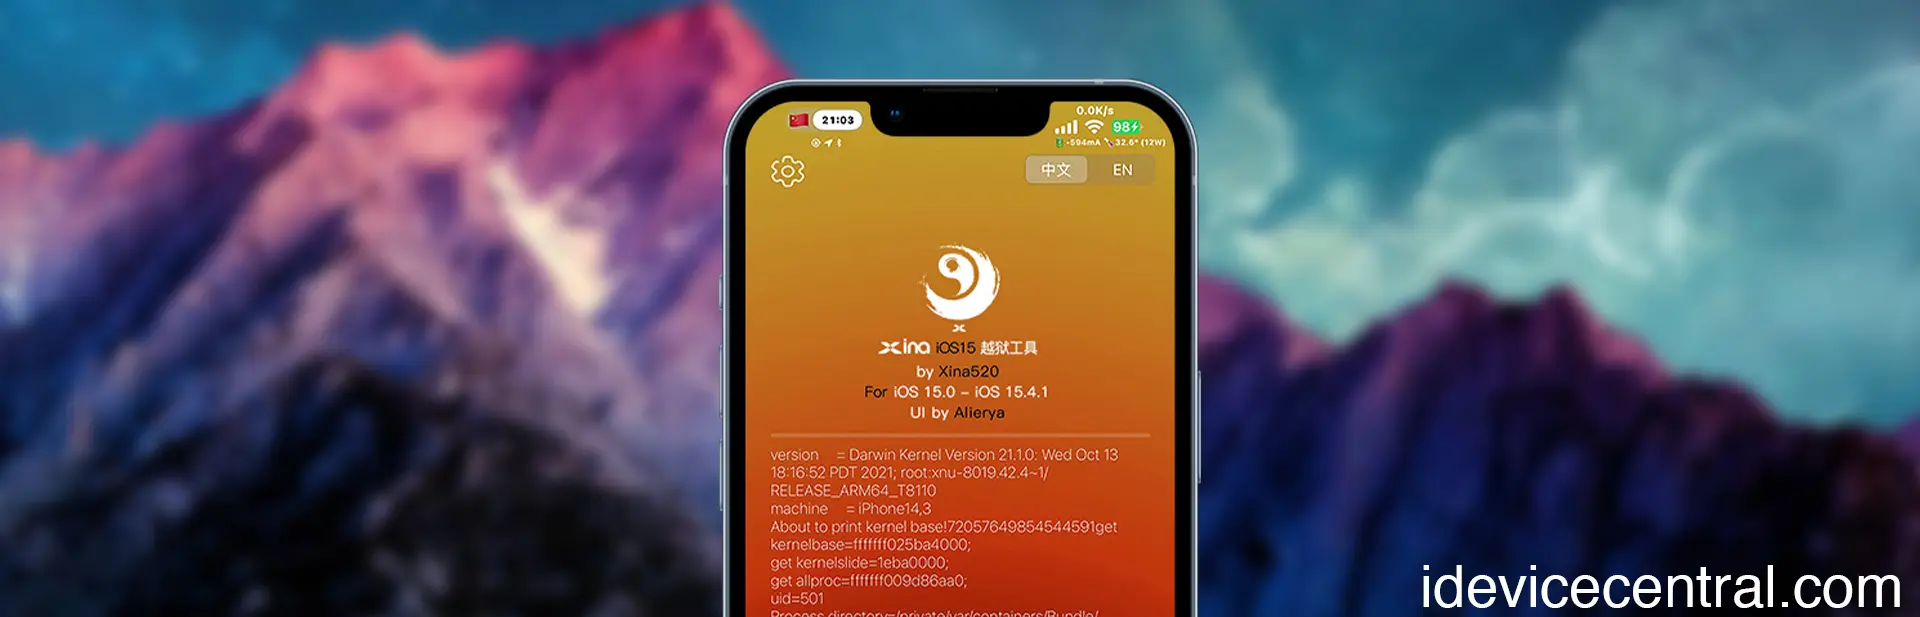 XinaA15 Jailbreak RELEASED with support for iOS 15.0 - 15.4.1 on A12+